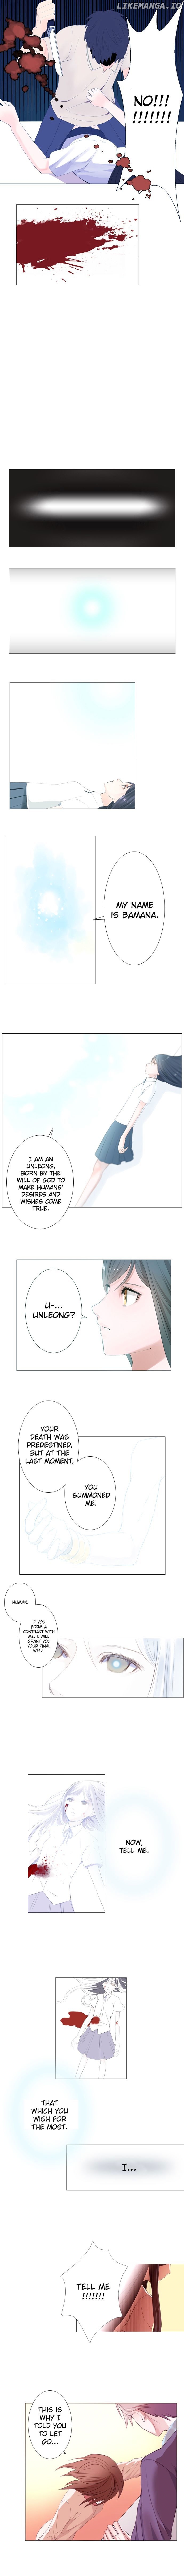 UnLeong chapter 5 - page 2